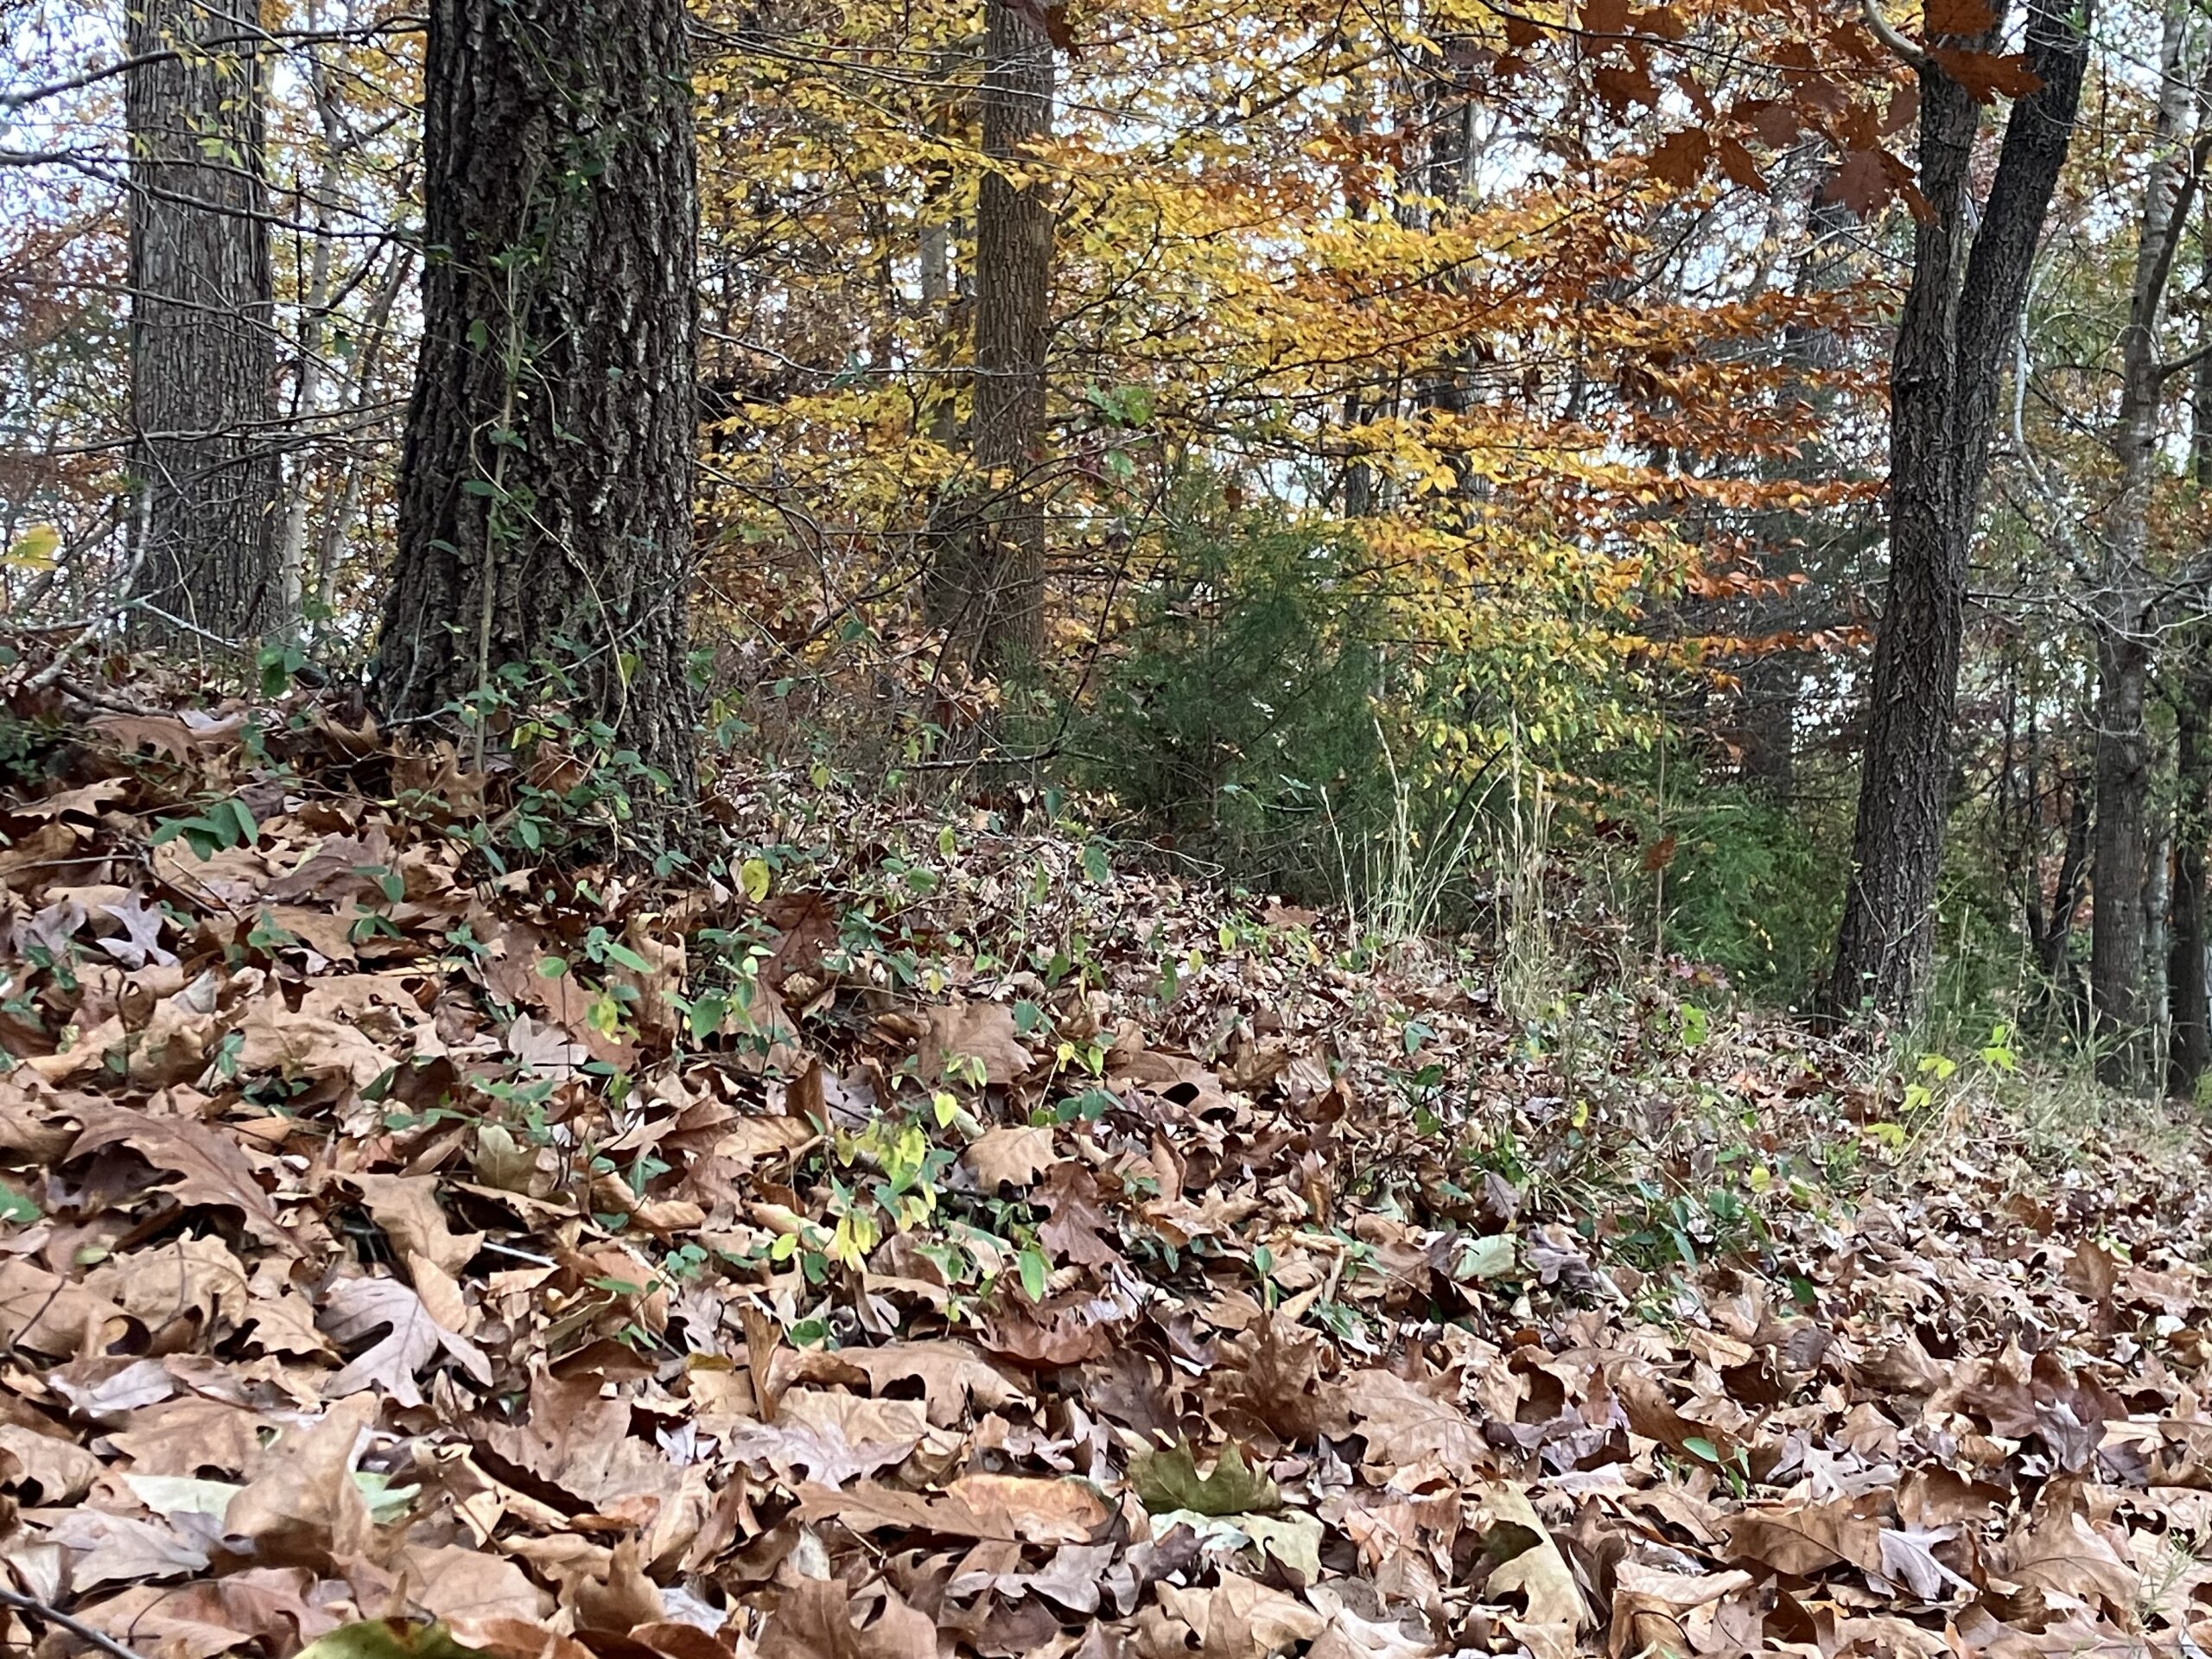 Ground-focused autumnal scenery. In the foreground is a pile of brown leaves. In the midground, tree trunks are visible. Attached tree leaves—in green, yellow, and orange hues—fill the background.